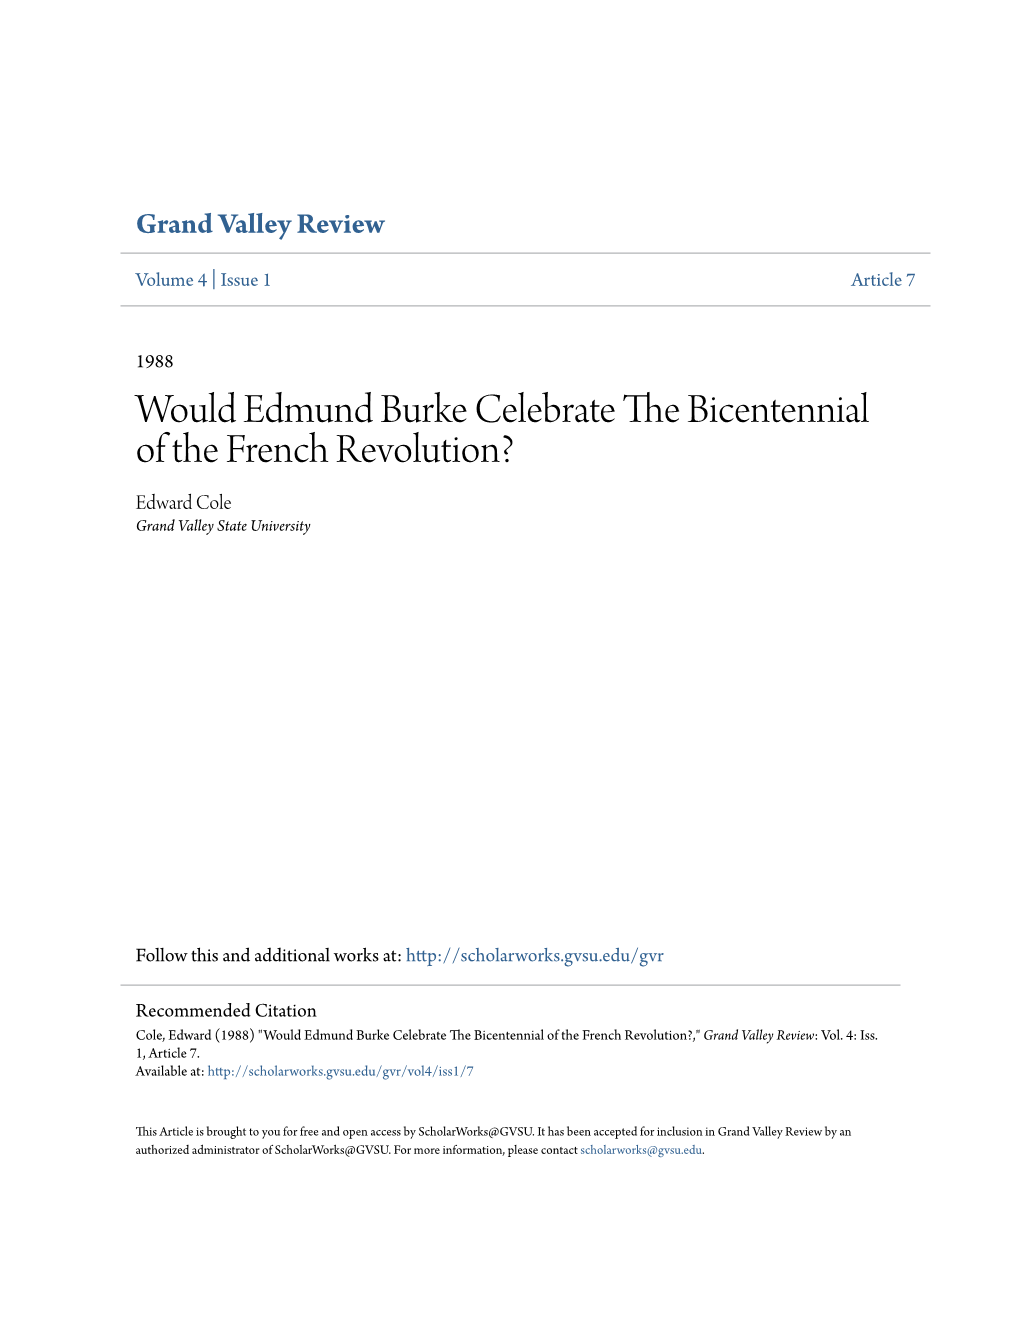 Would Edmund Burke Celebrate the Bicentennial of the French Revolution? EDWARD COLE